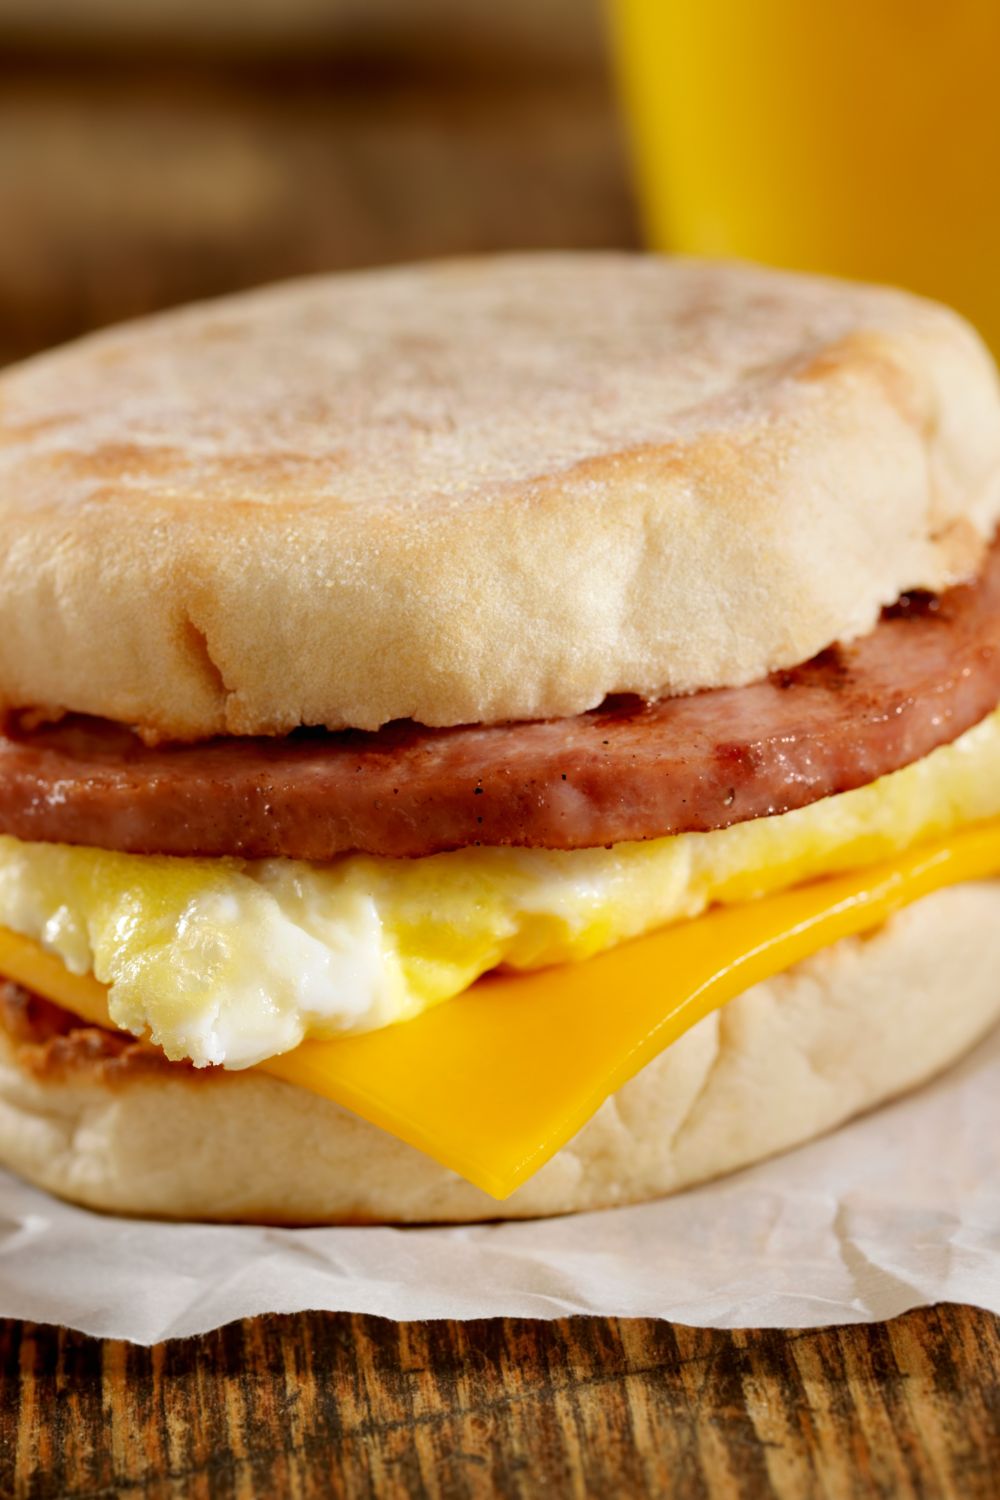 A simple egg sandwich on an english muffin with sausage and cheese